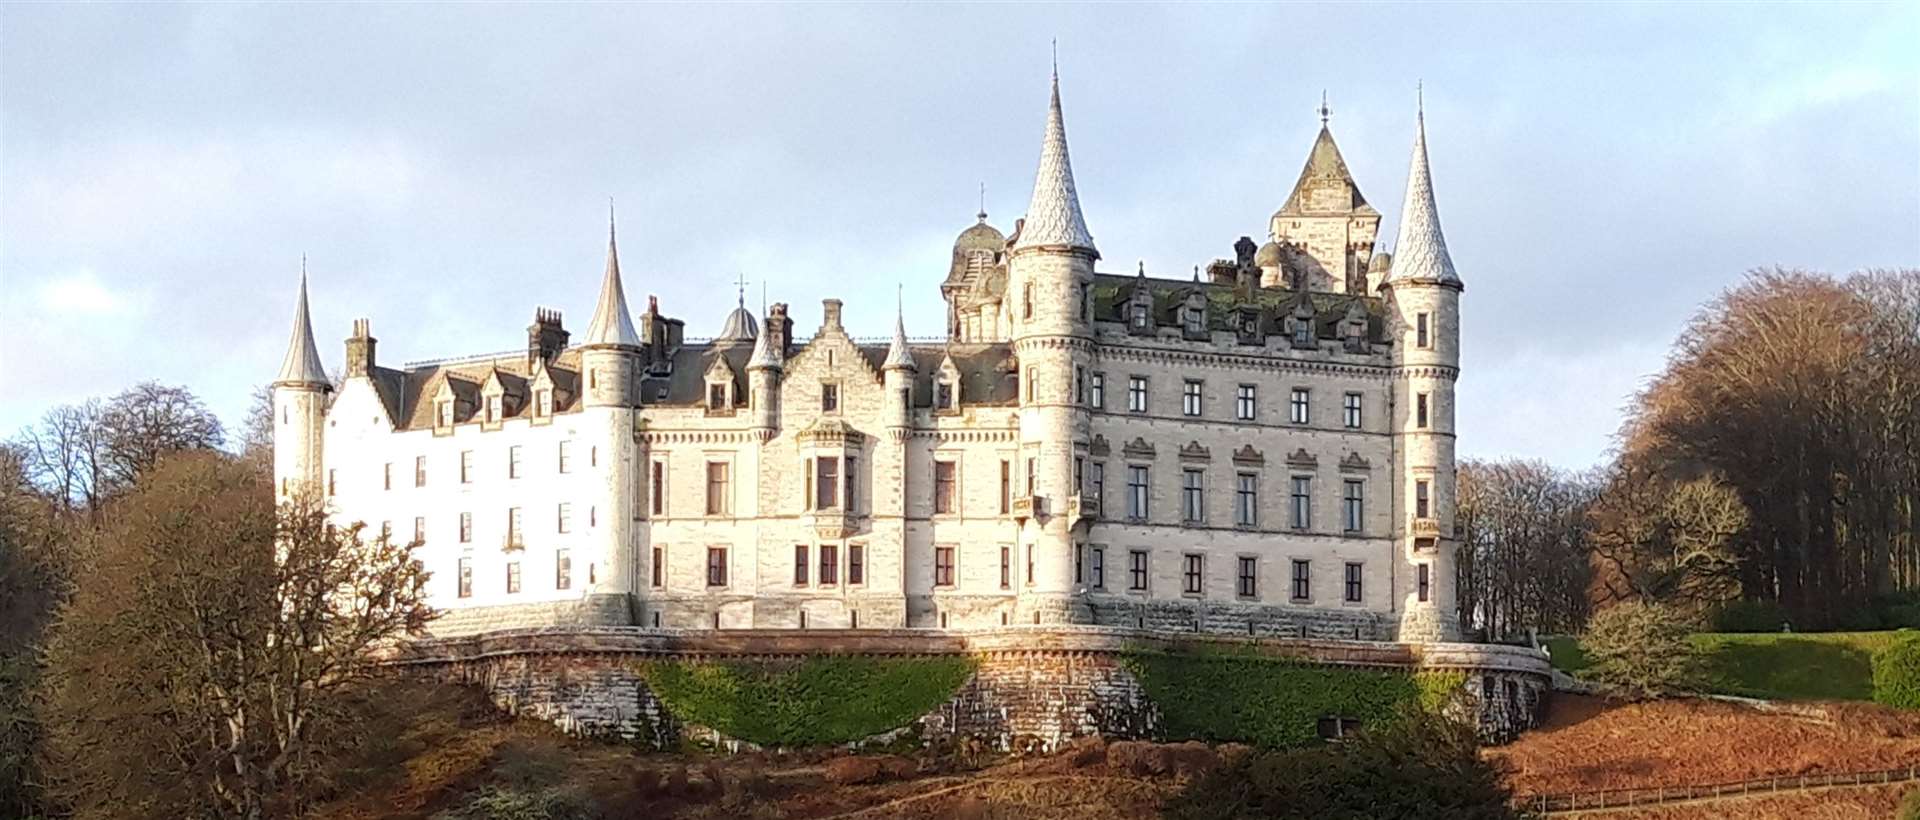 Dunrobin Castle was due to be open but has remained closed because of lockdown.